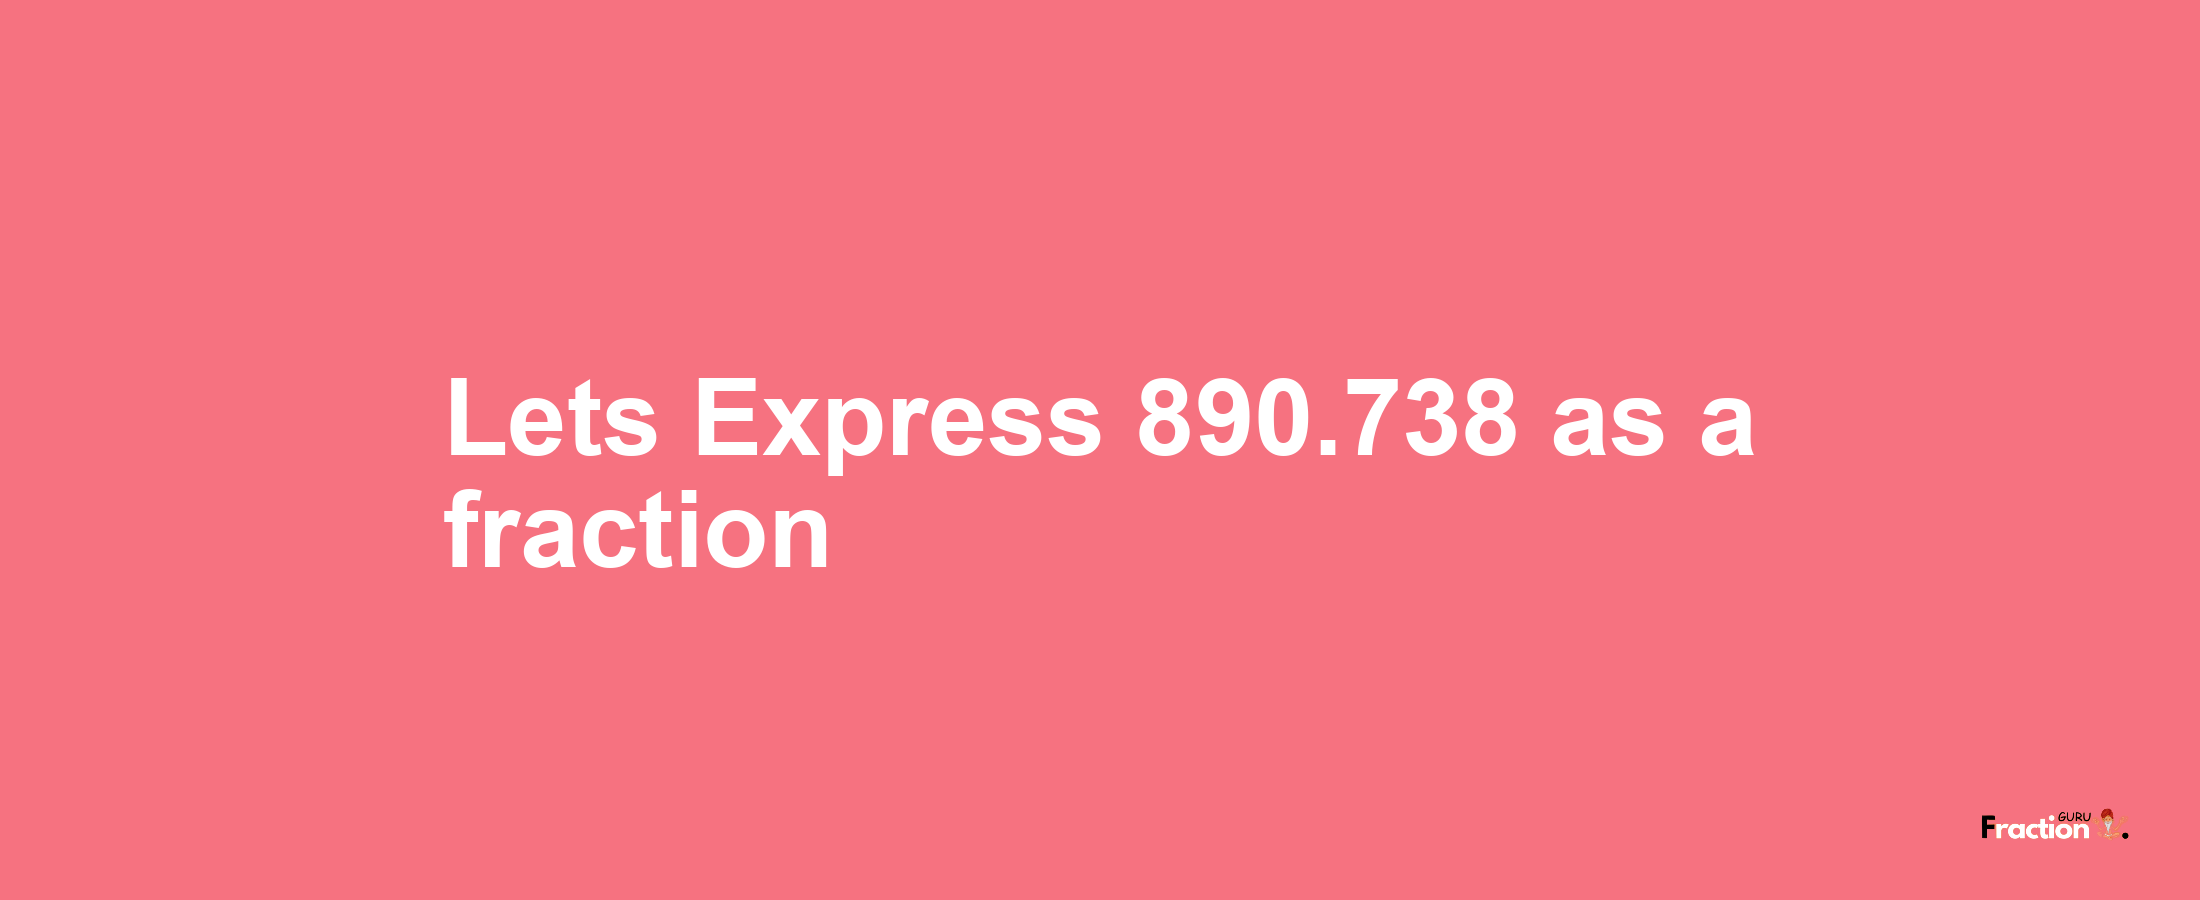 Lets Express 890.738 as afraction